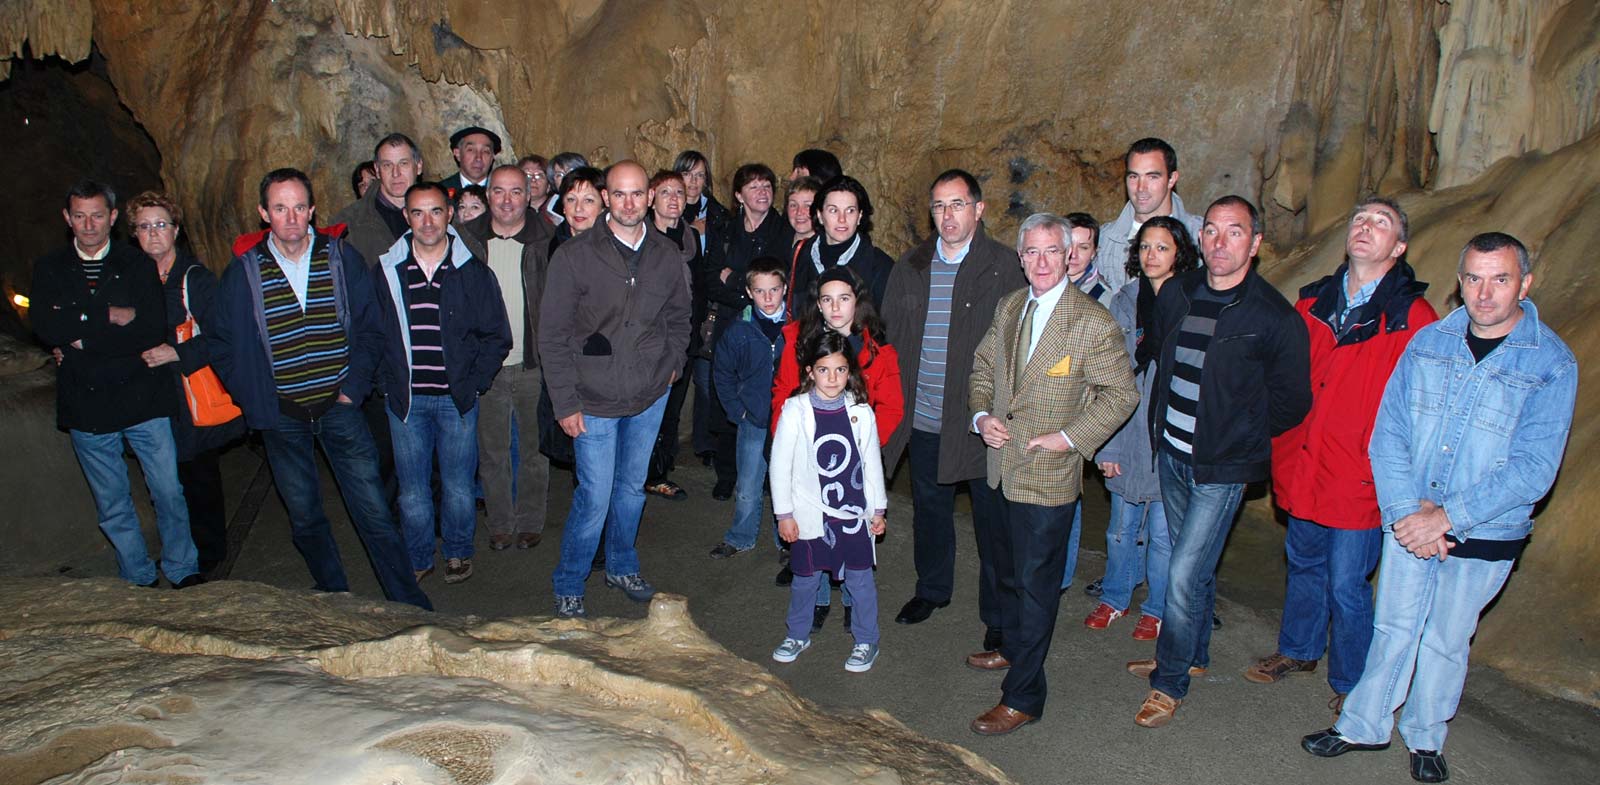 http://www.asson.fr/actualites/2009/0904/0904-grottes-1.jpg